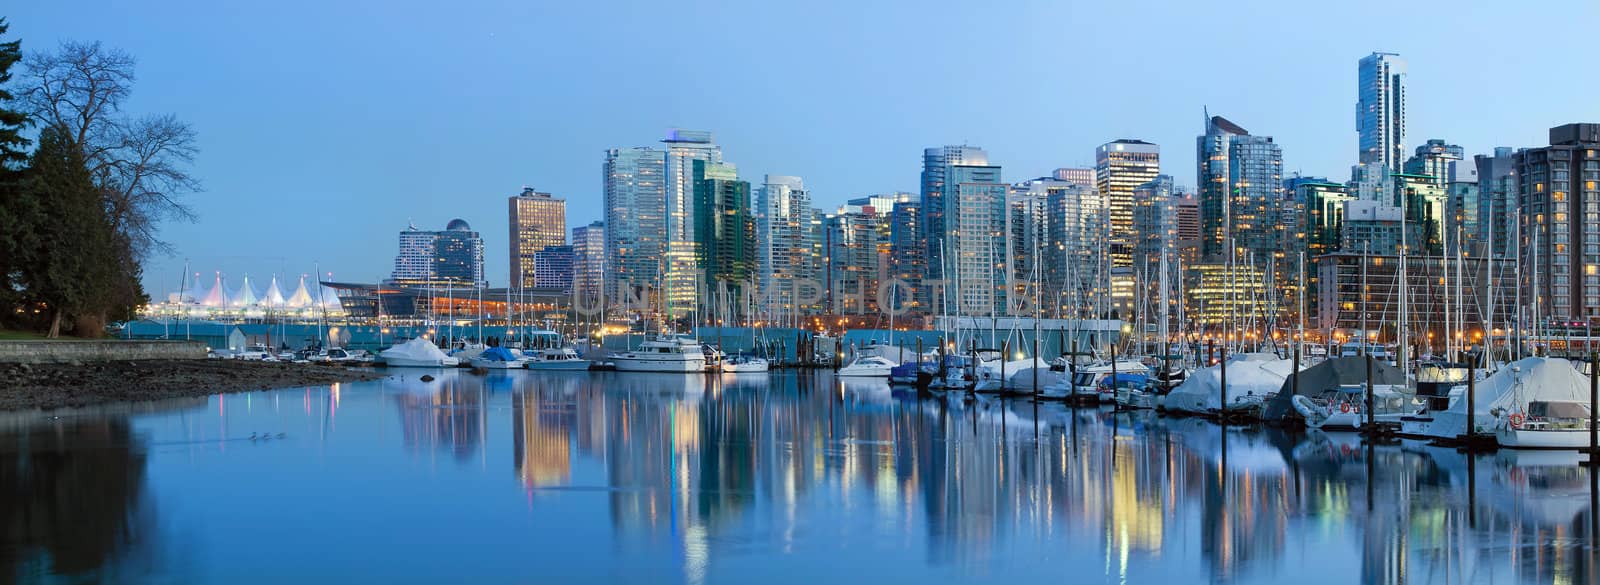 Vancouver BC City Skyline at Dusk by Davidgn